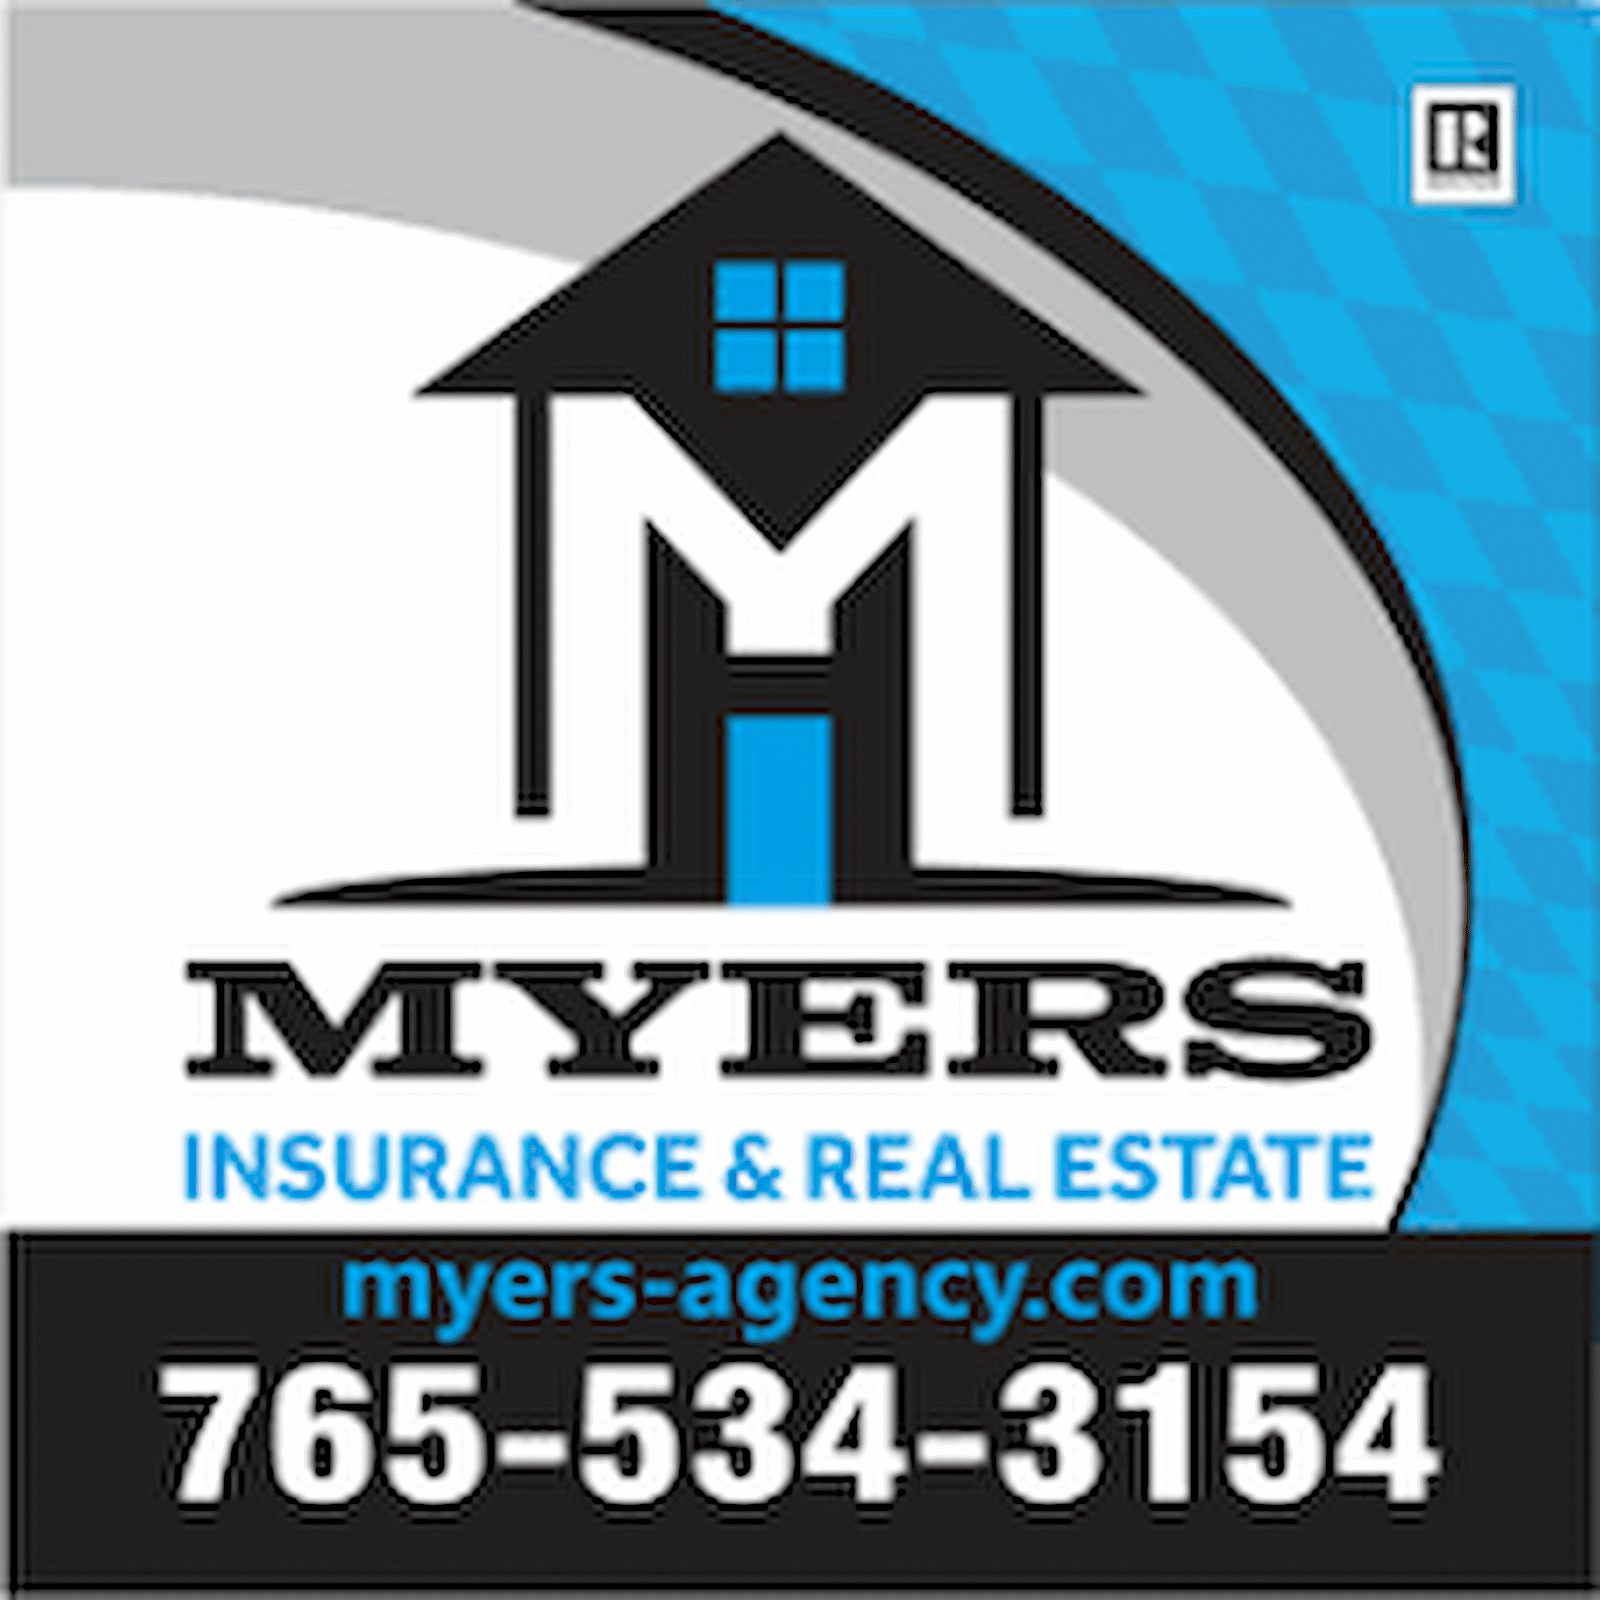 Myers Insurance & Real Estate